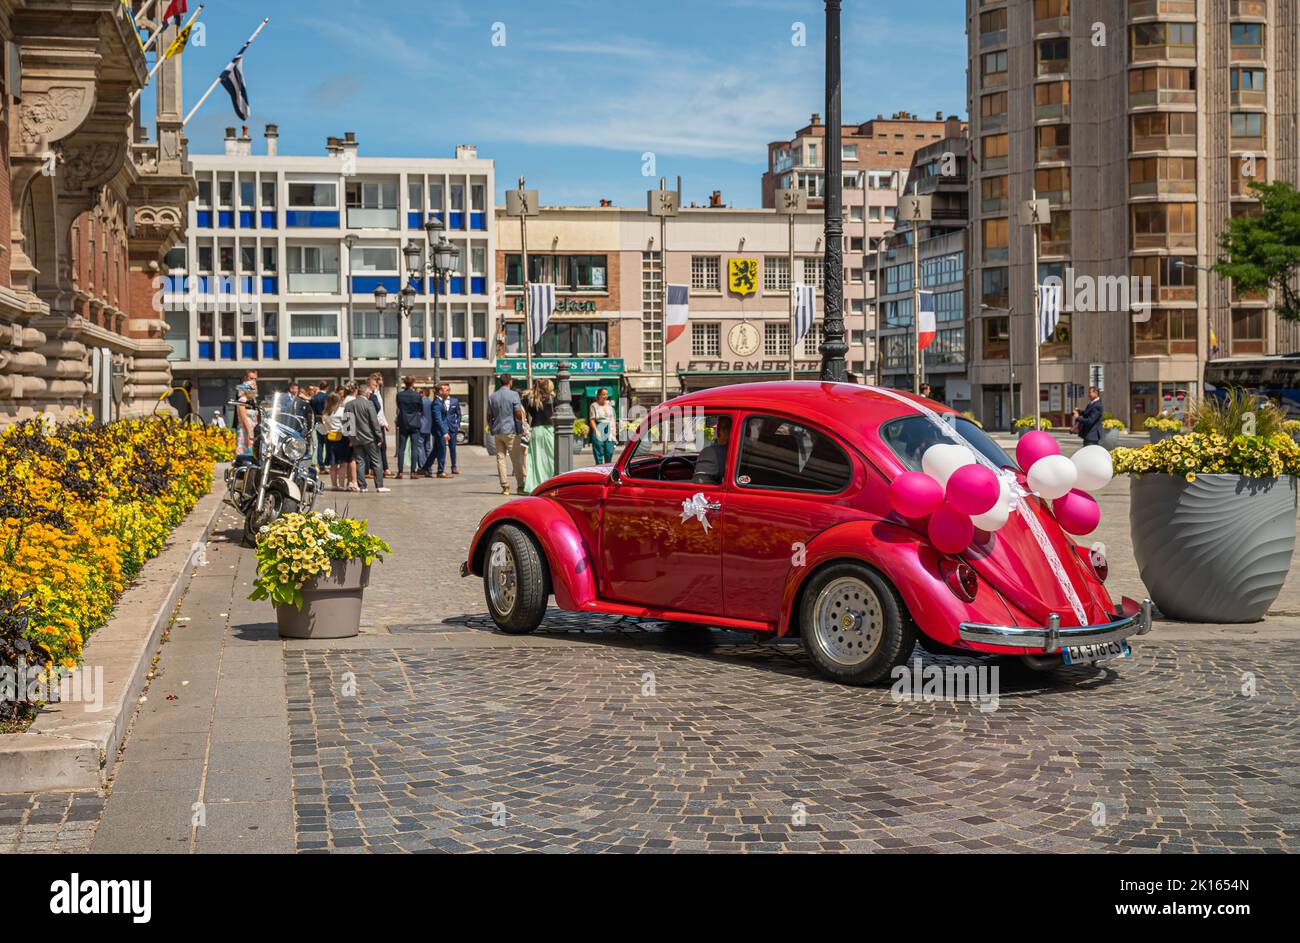 Europe, France, Dunkerque - July 9, 2022: In front of historic town hall. Closep of historic pink VW beetle car with balloons used by just married cou Stock Photo